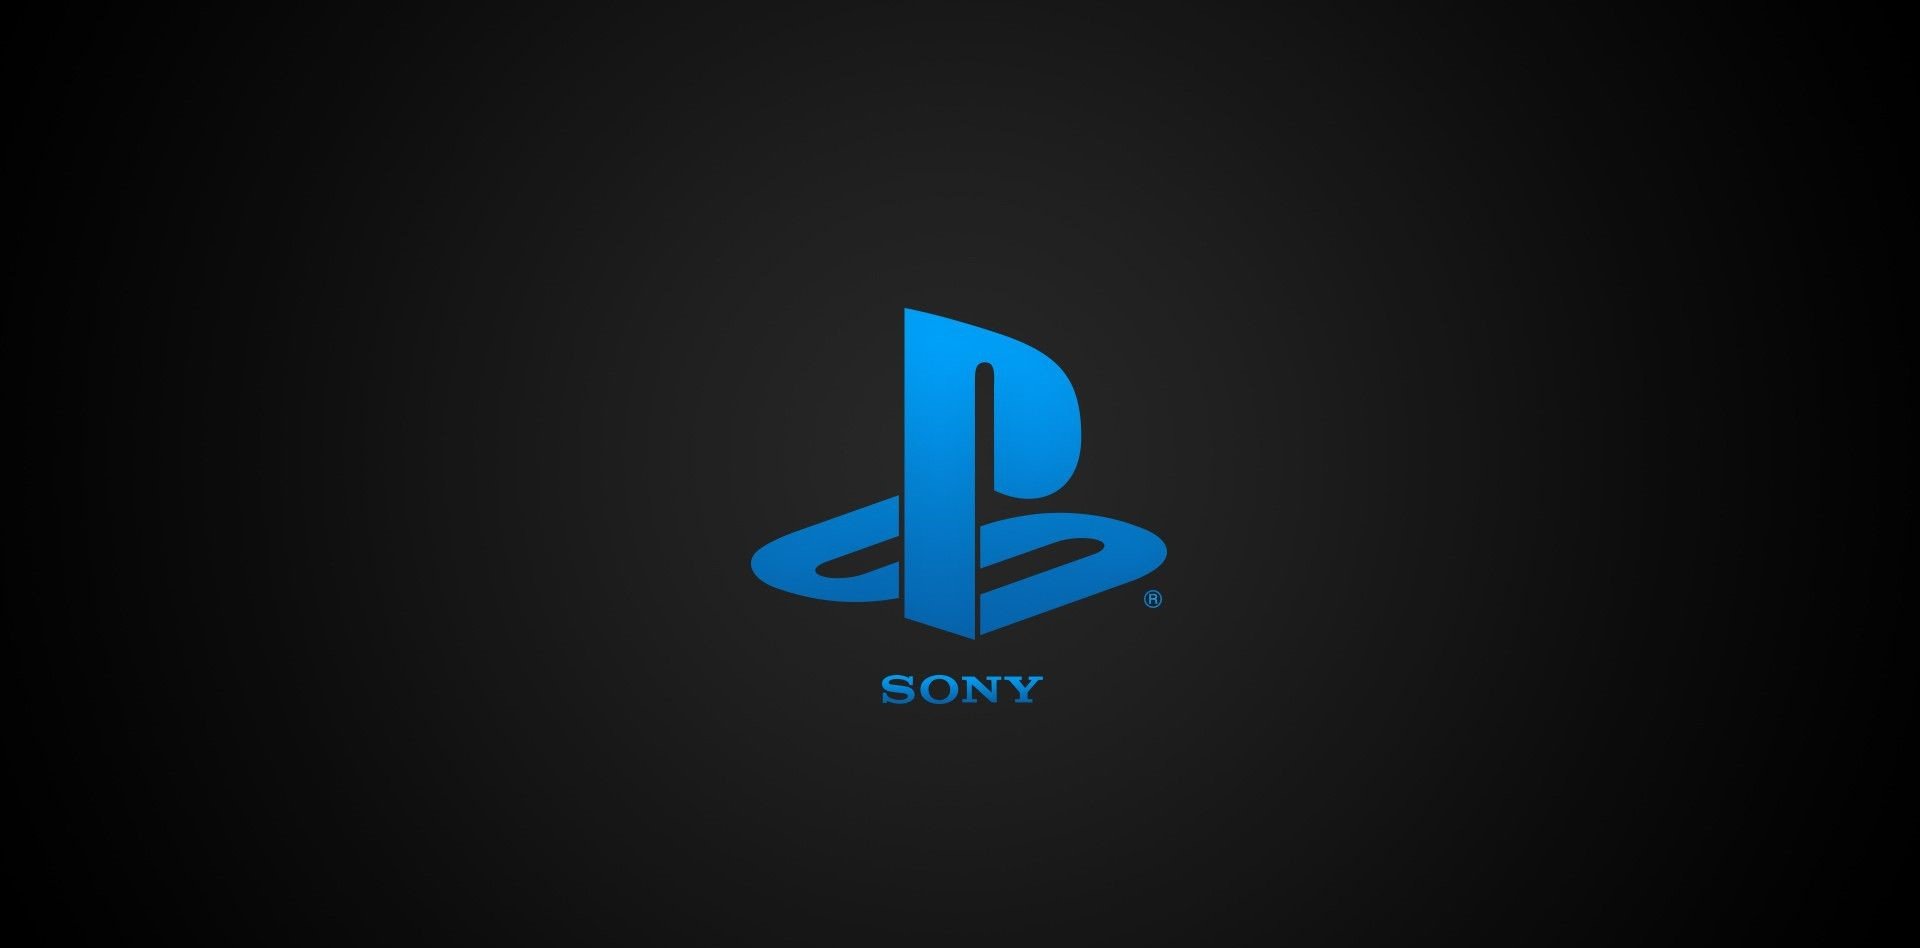 Sony will support PlayStation 4, possibly until 2022.